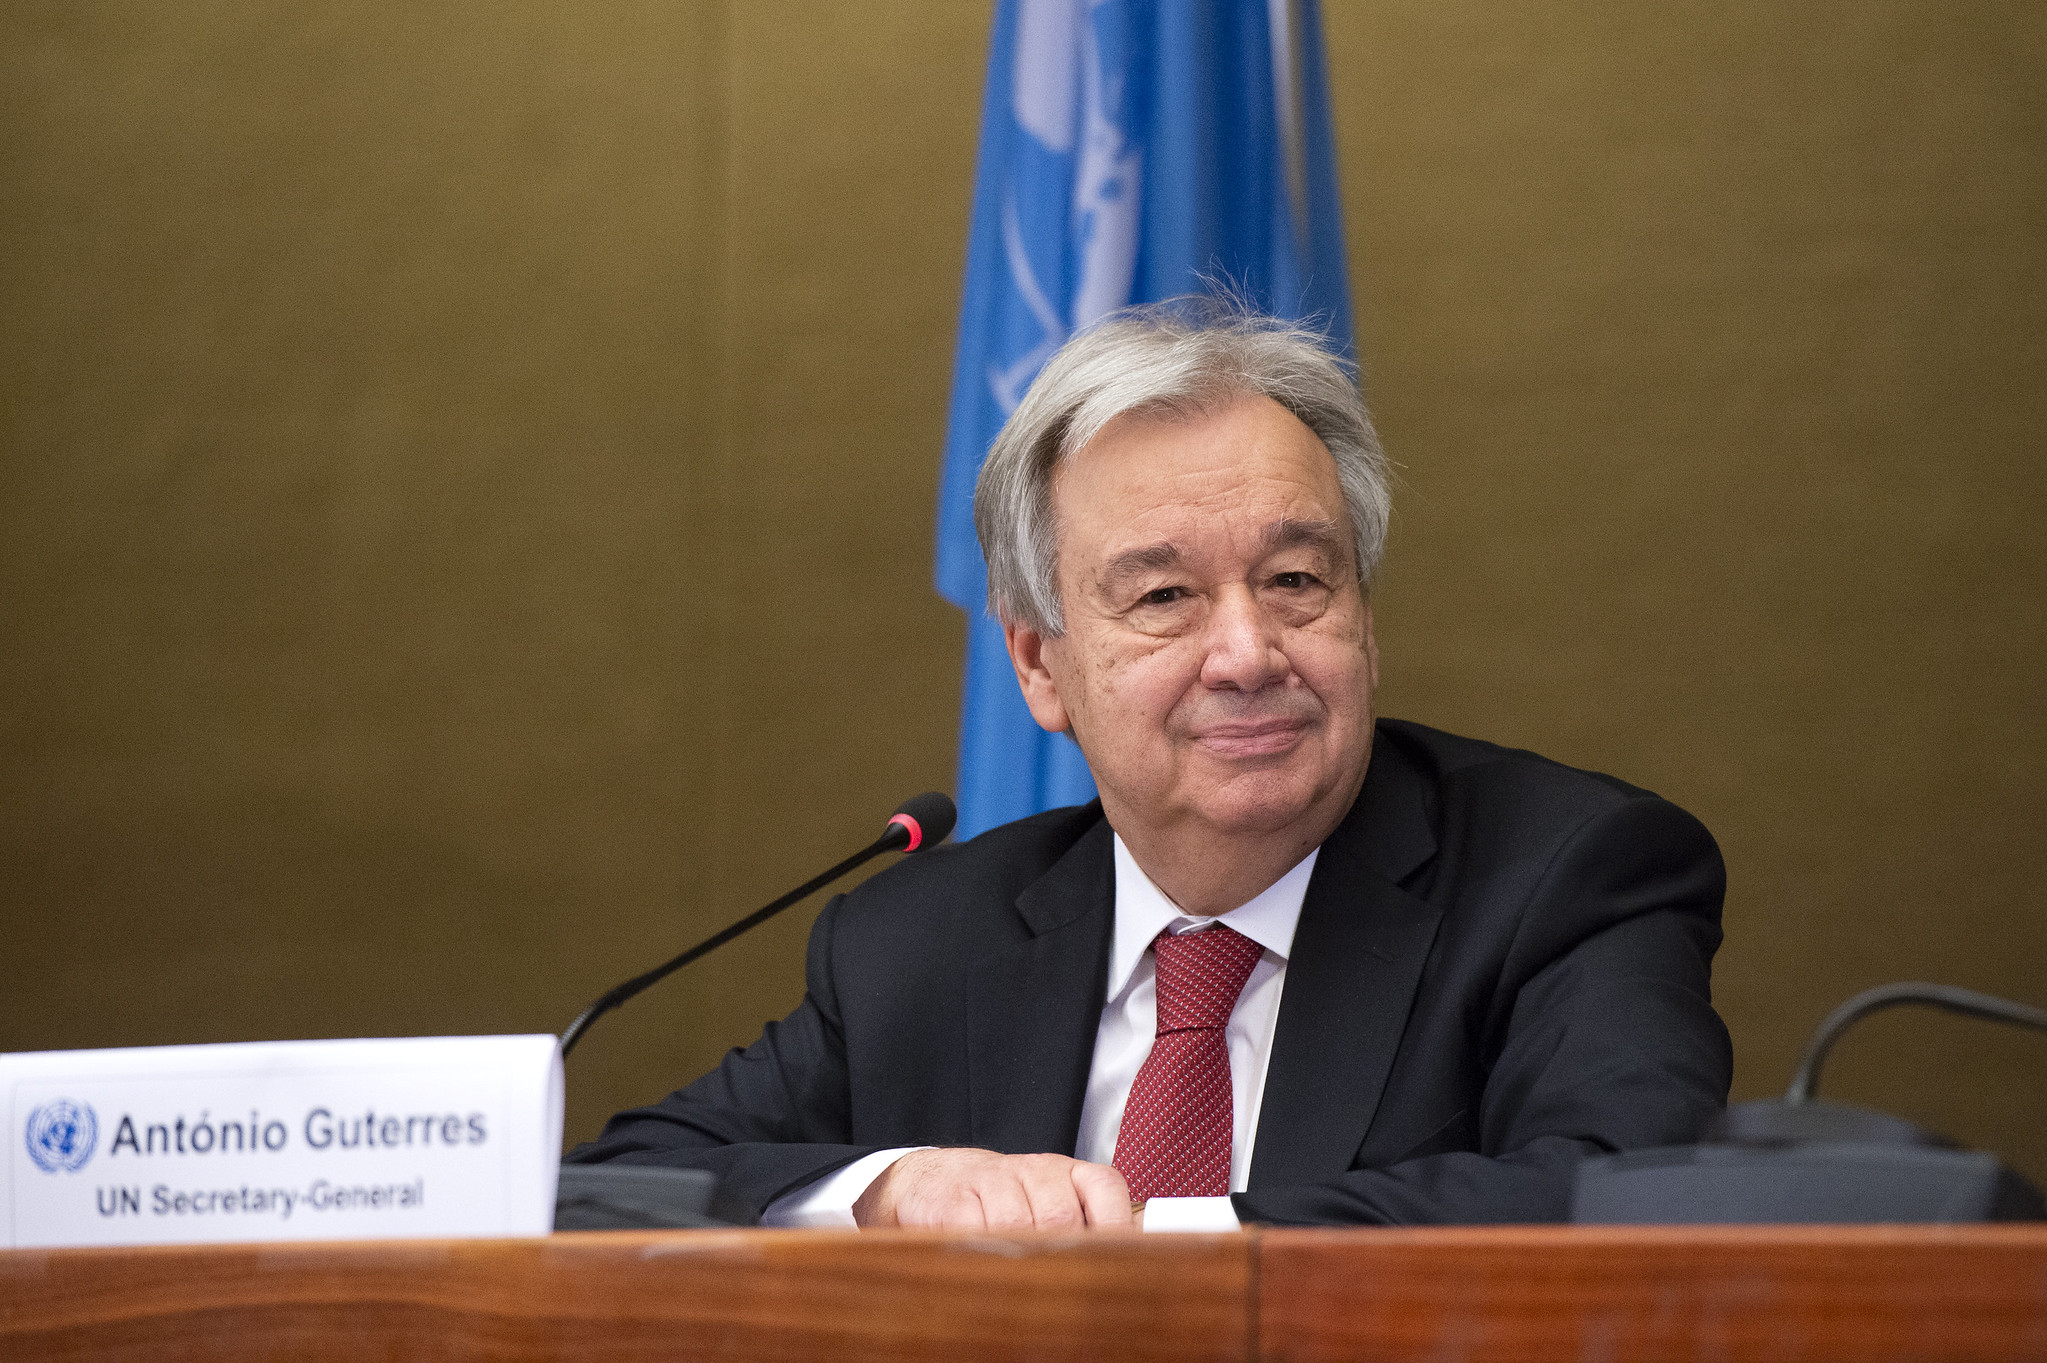 Guterres: Everyone has Duty to Help Refugees Rebuild their Lives